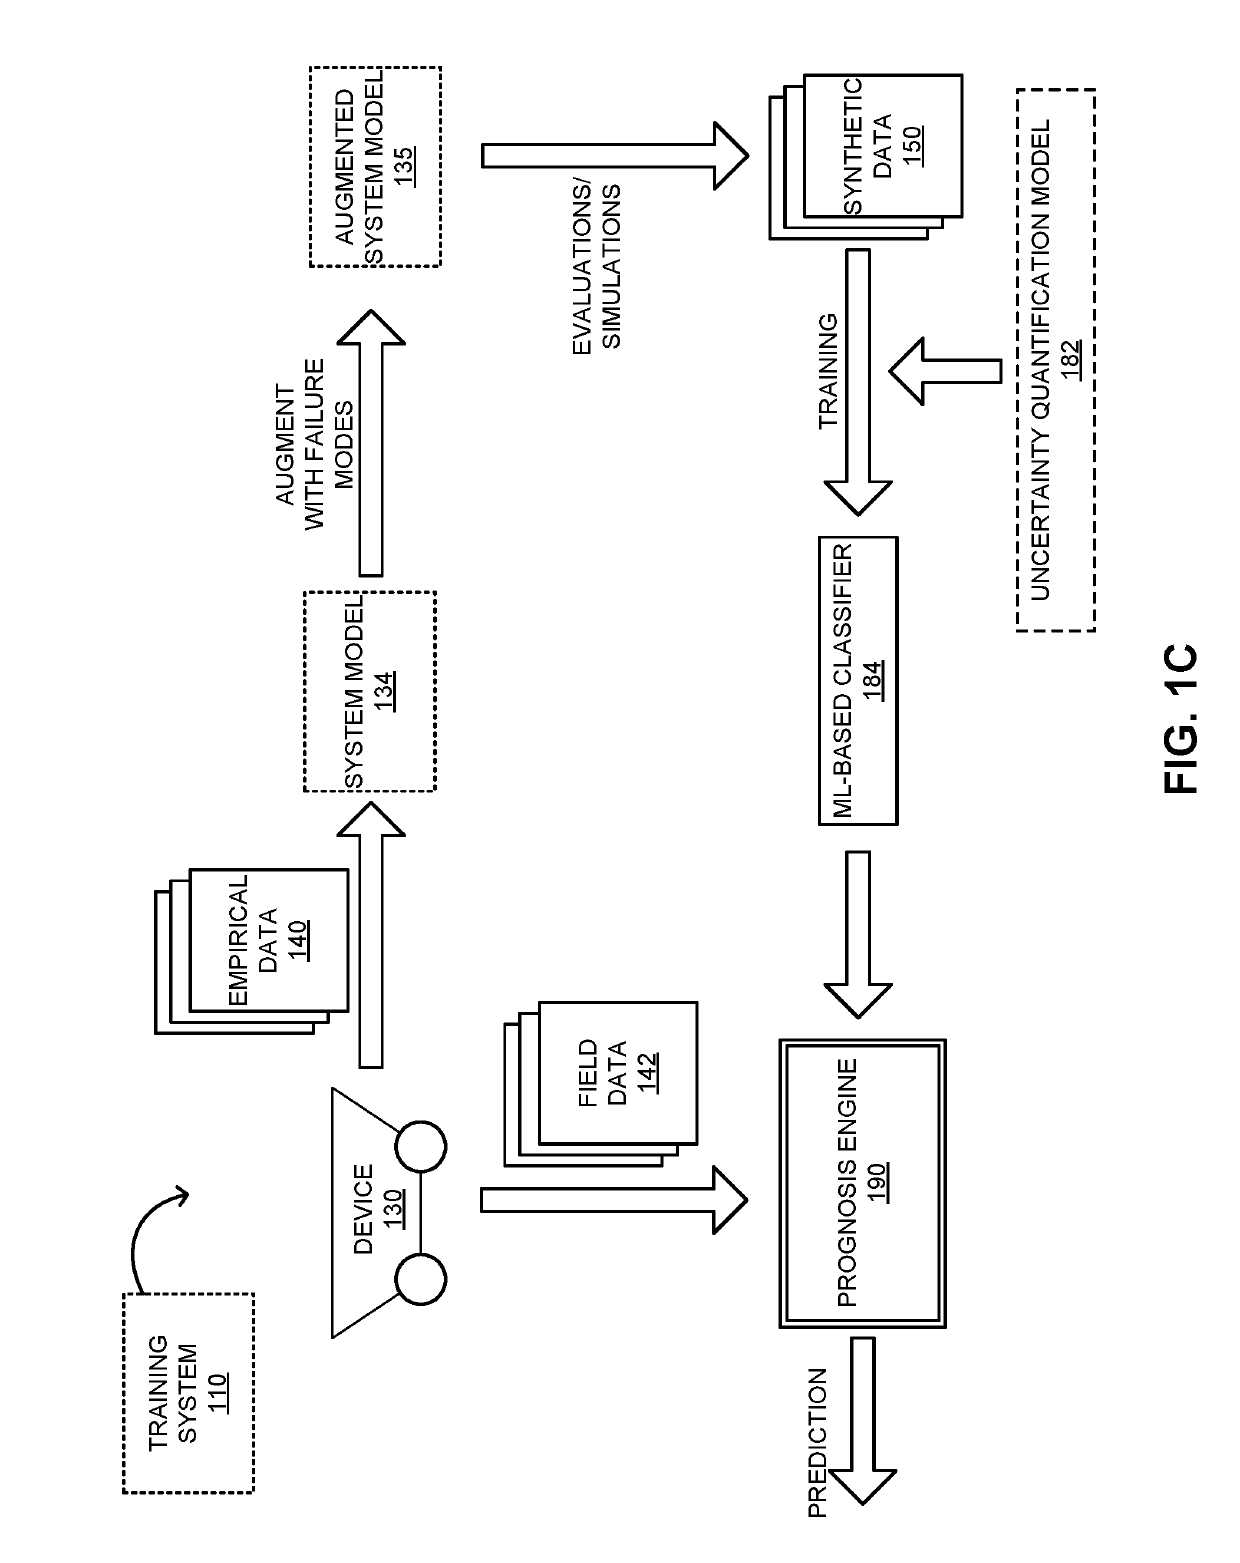 System and method for facilitating prediction data for device based on synthetic data with uncertainties